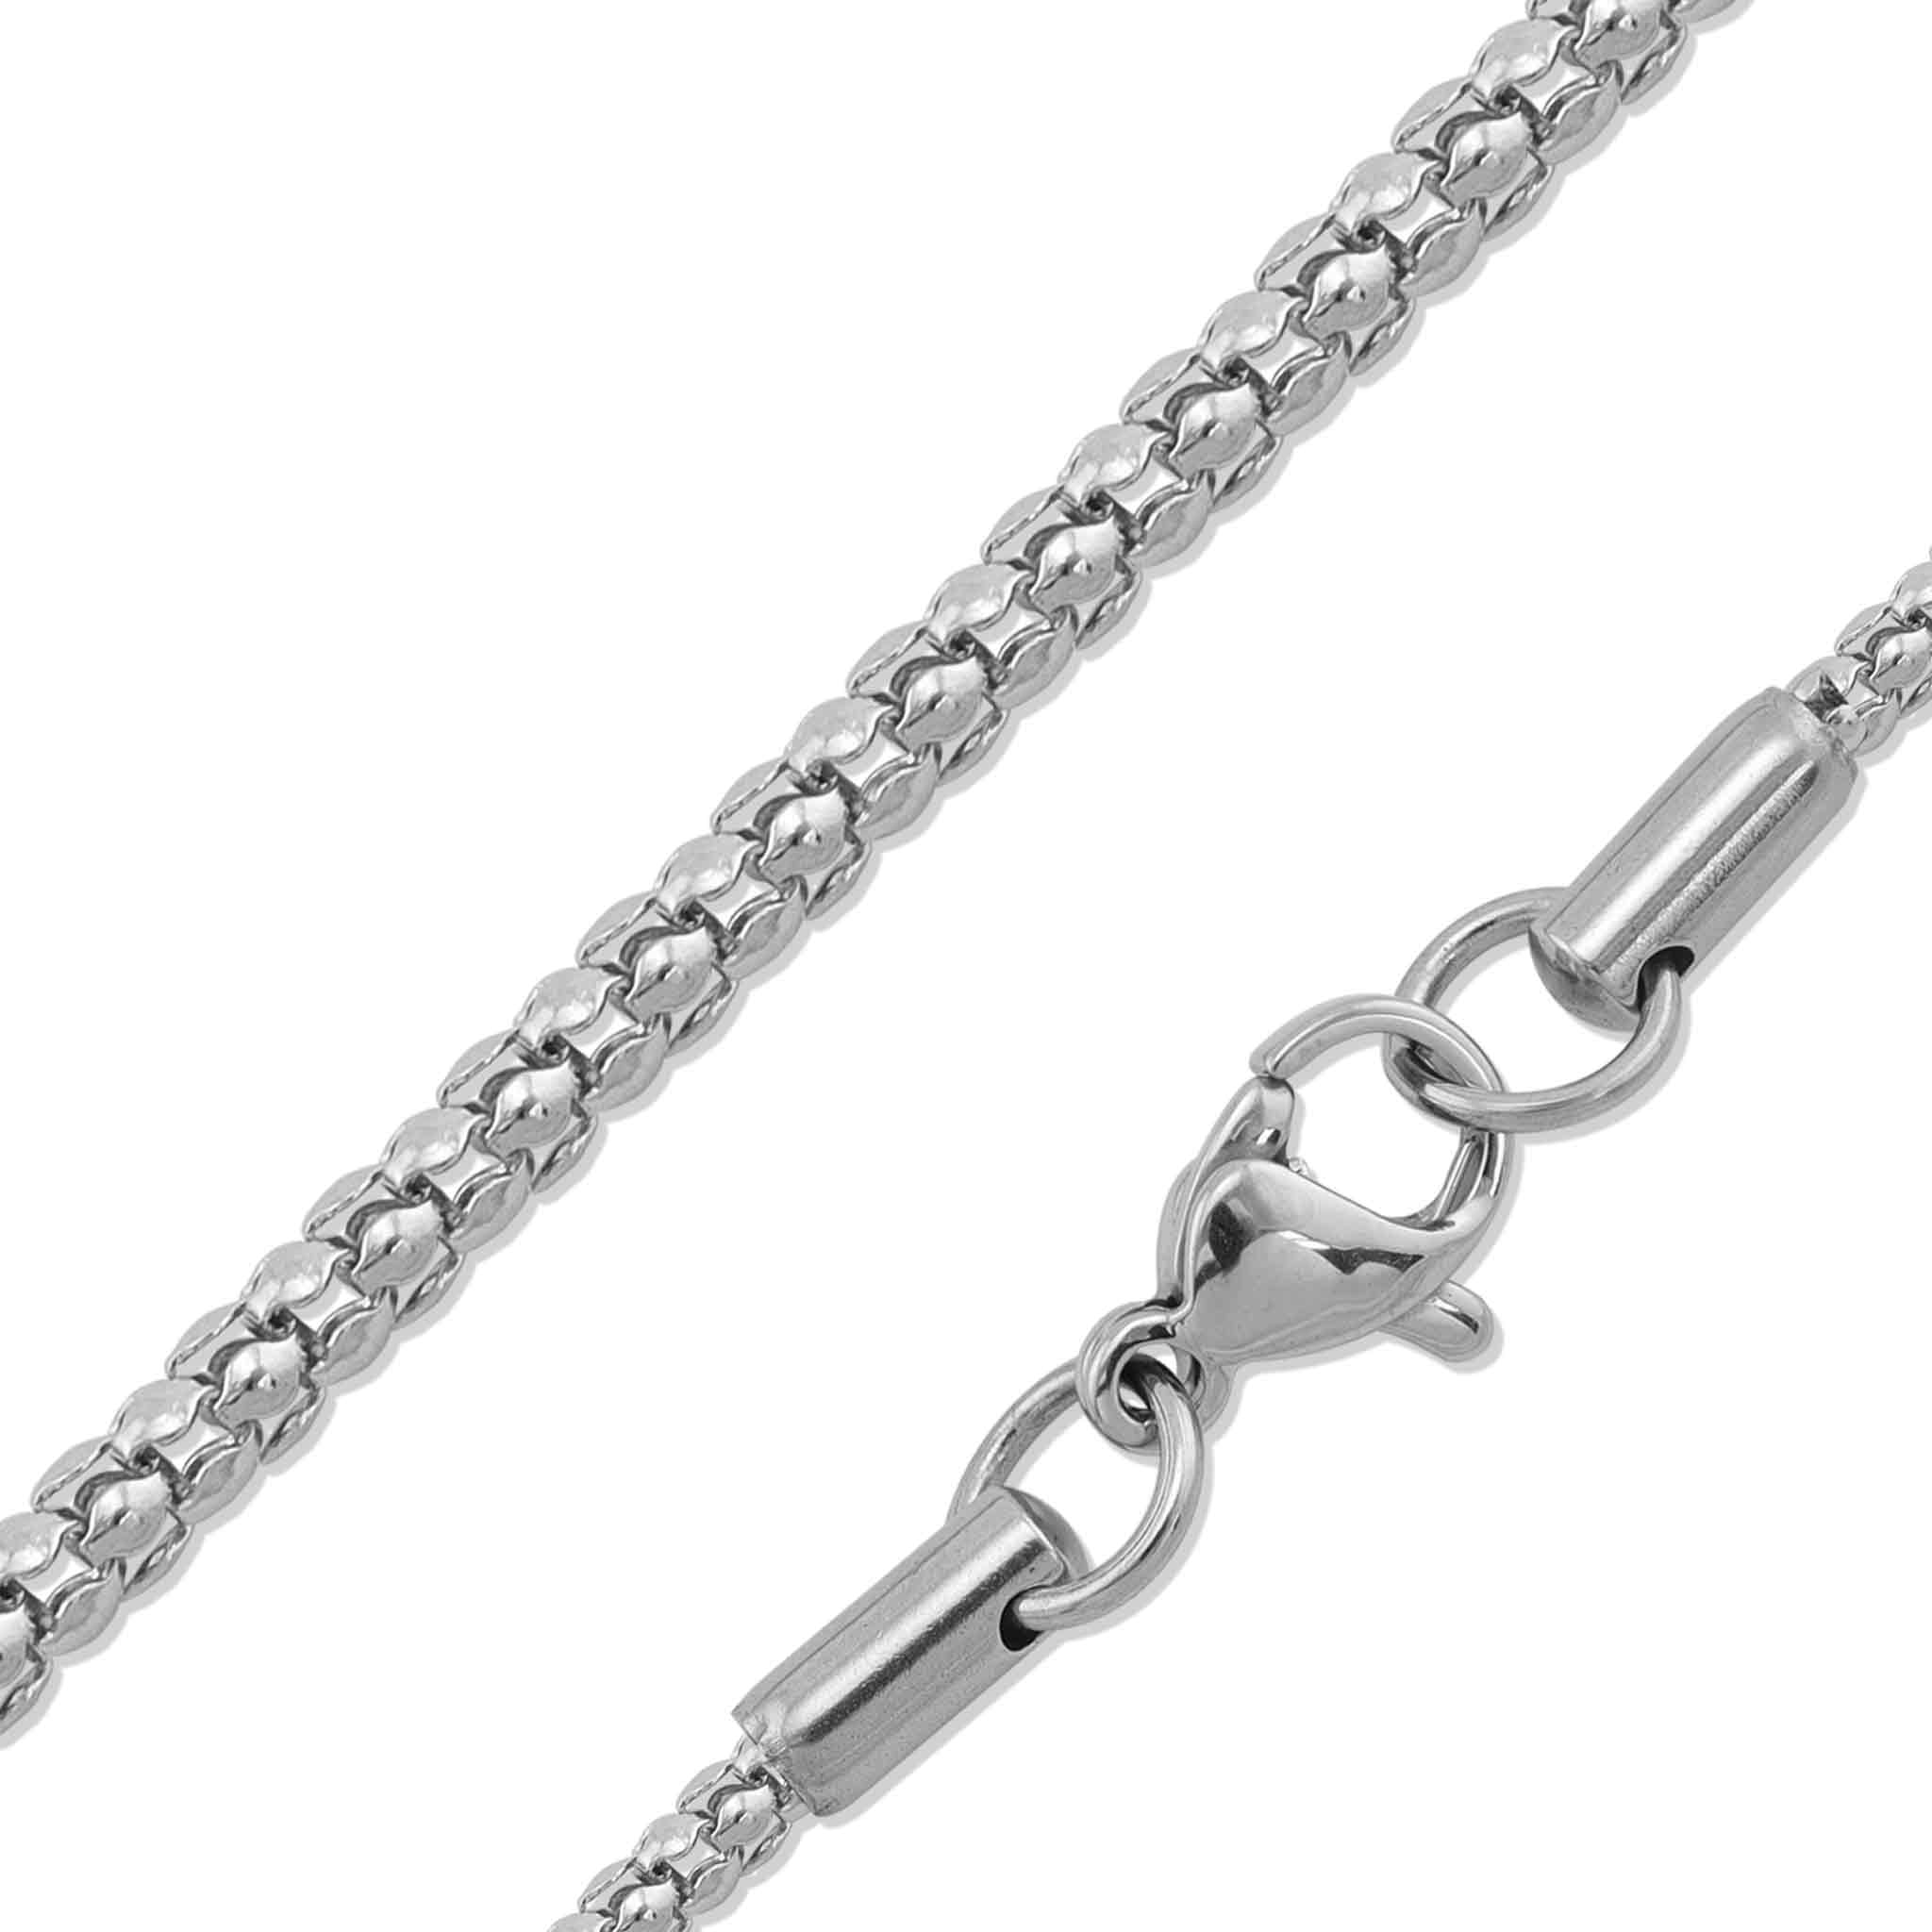 Stainless Steel Snake Chain Necklace Chn7900 | Wholesale Jewelry 